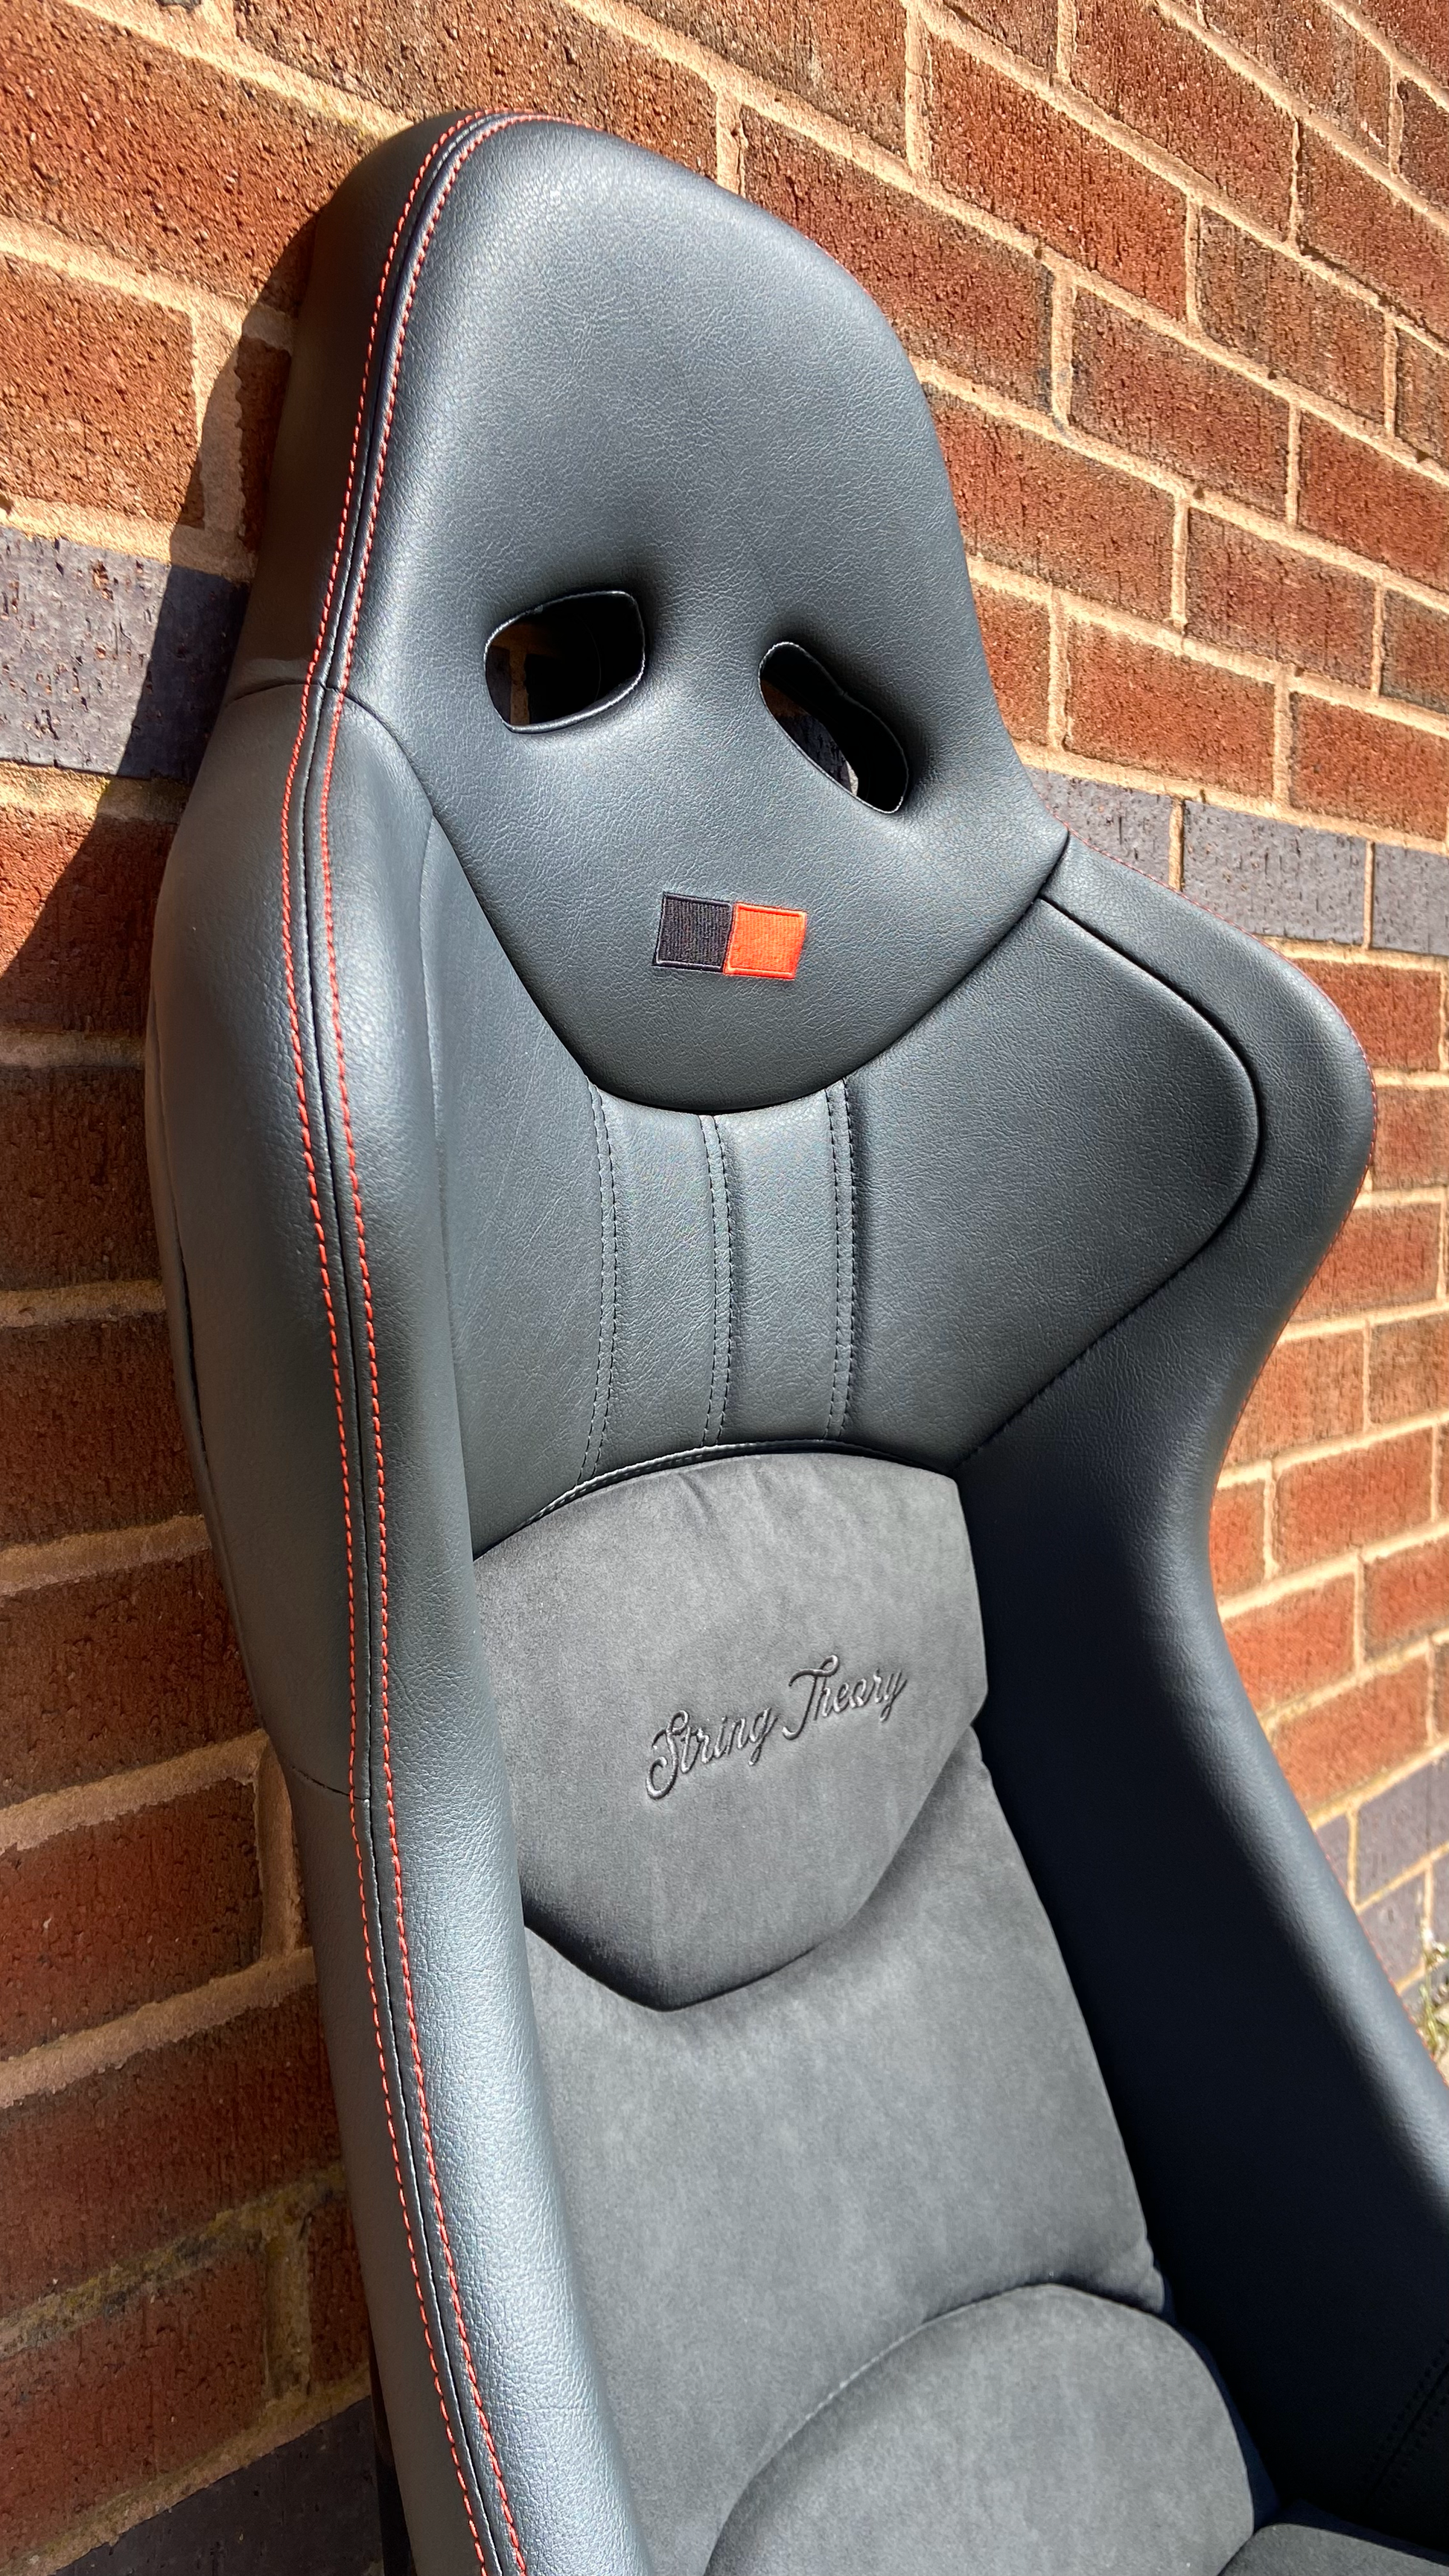 Offside front view of a black Cobra Nogaro Circuit sports seat with red stitching, red / black emblem on the headrest & a String Theory logo sewn into the back rest